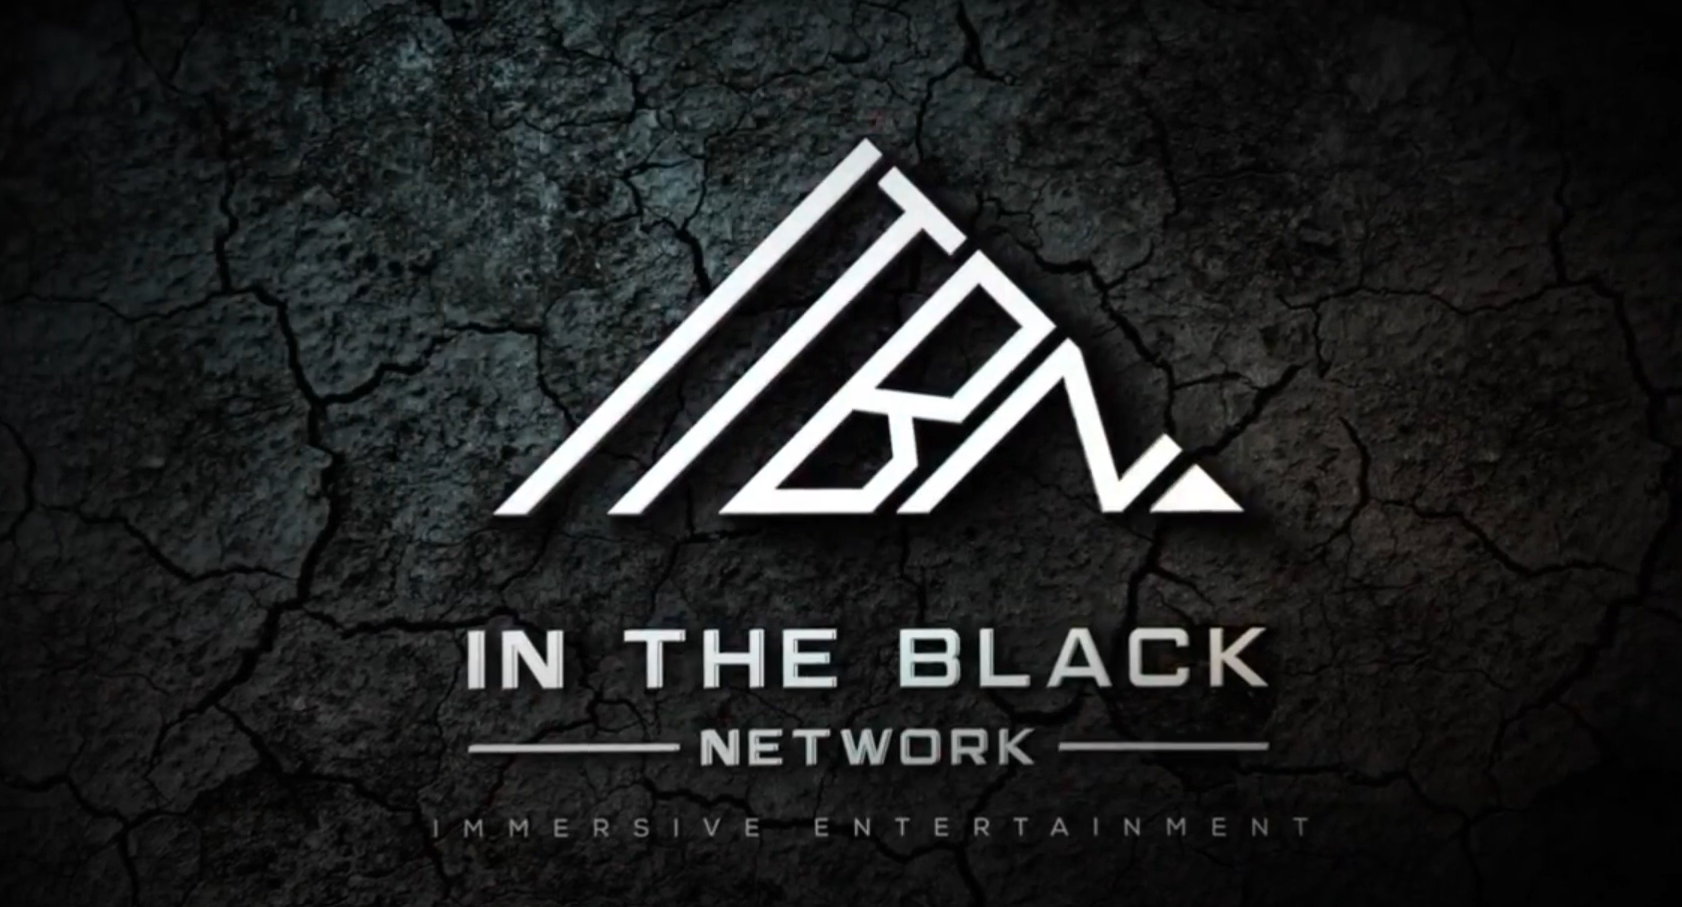 In The Black Network